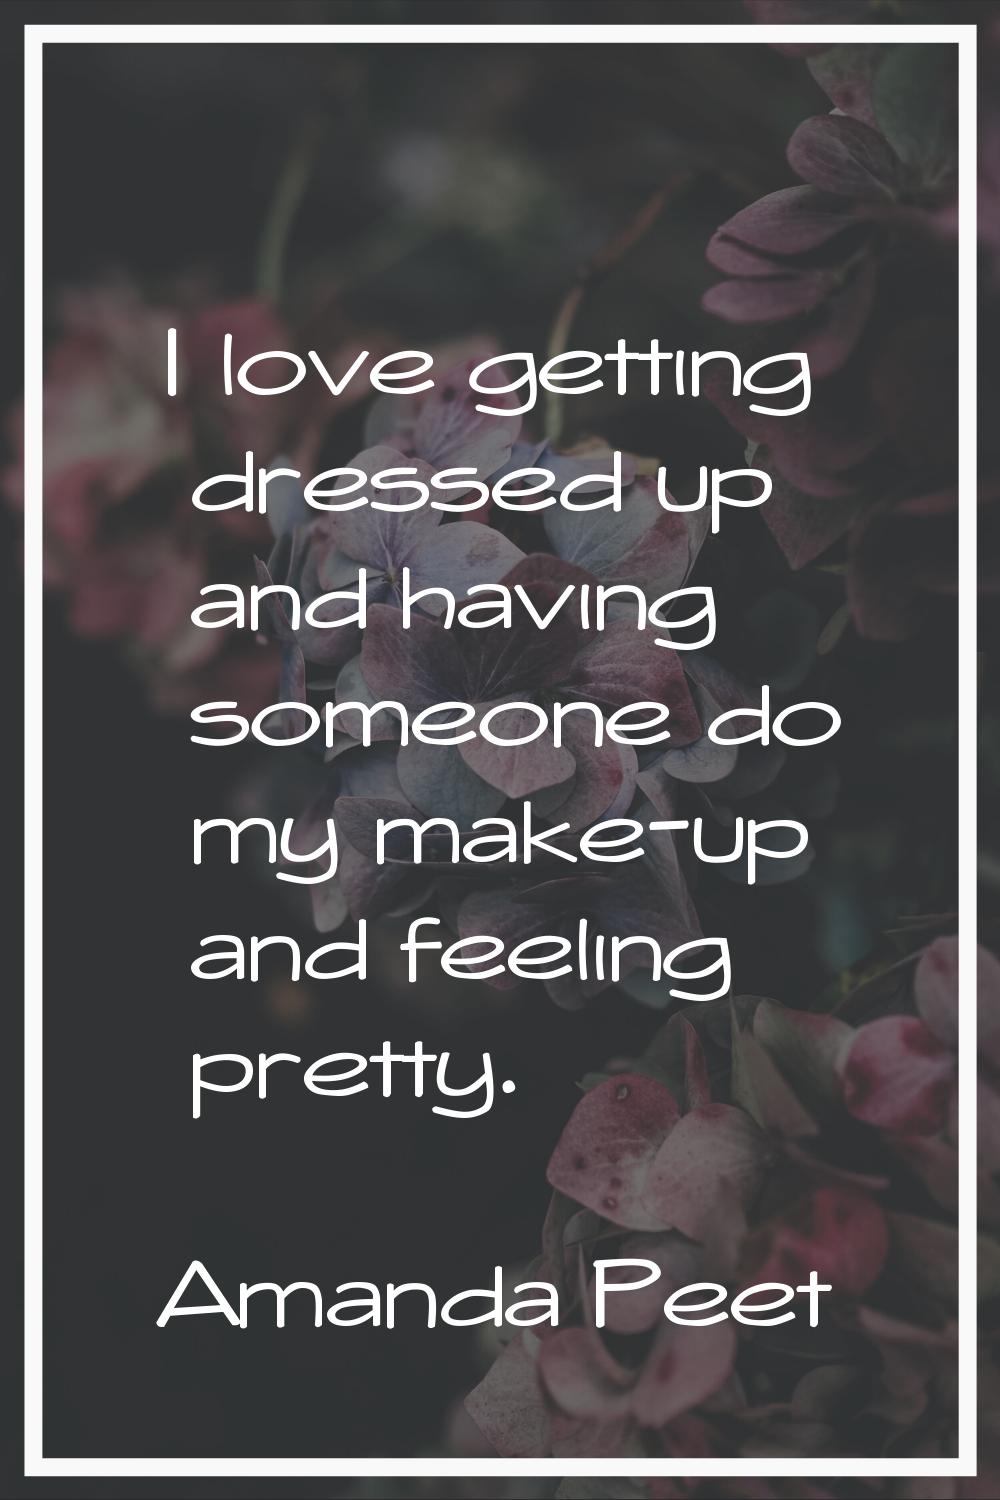 I love getting dressed up and having someone do my make-up and feeling pretty.